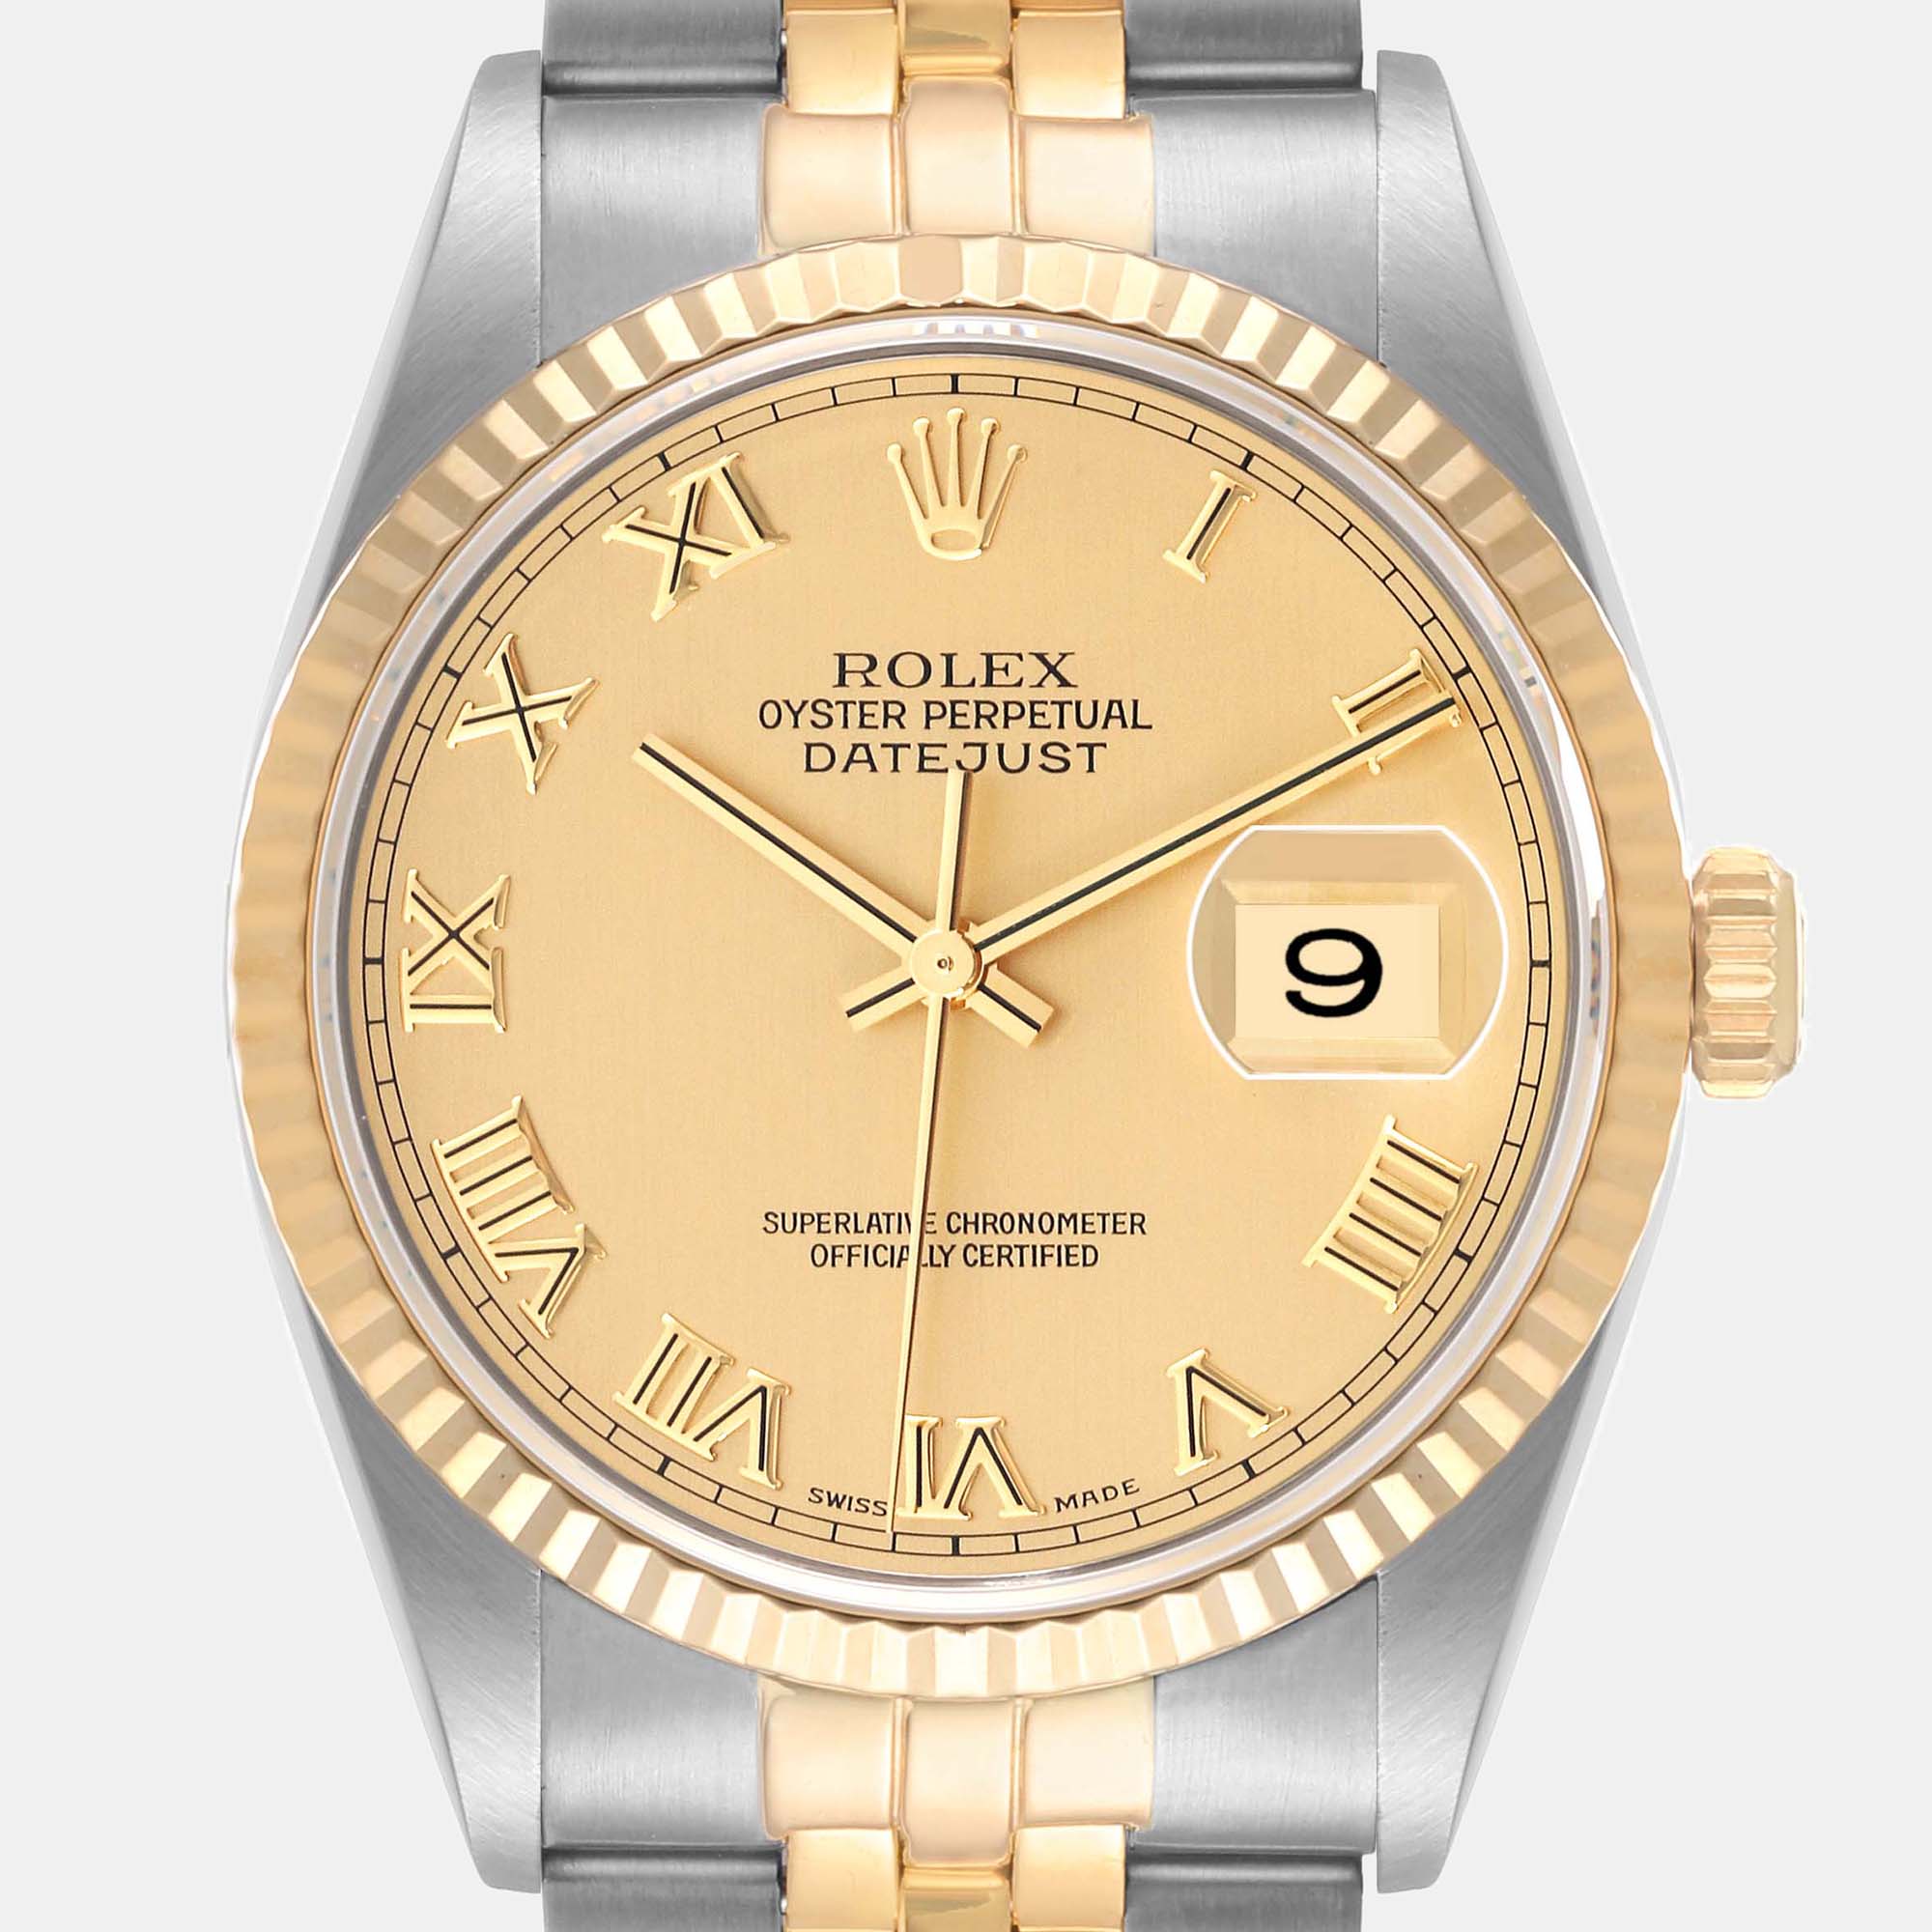 Rolex Datejust Steel Yellow Gold Champagne Dial Men's Watch 16233 36 Mm